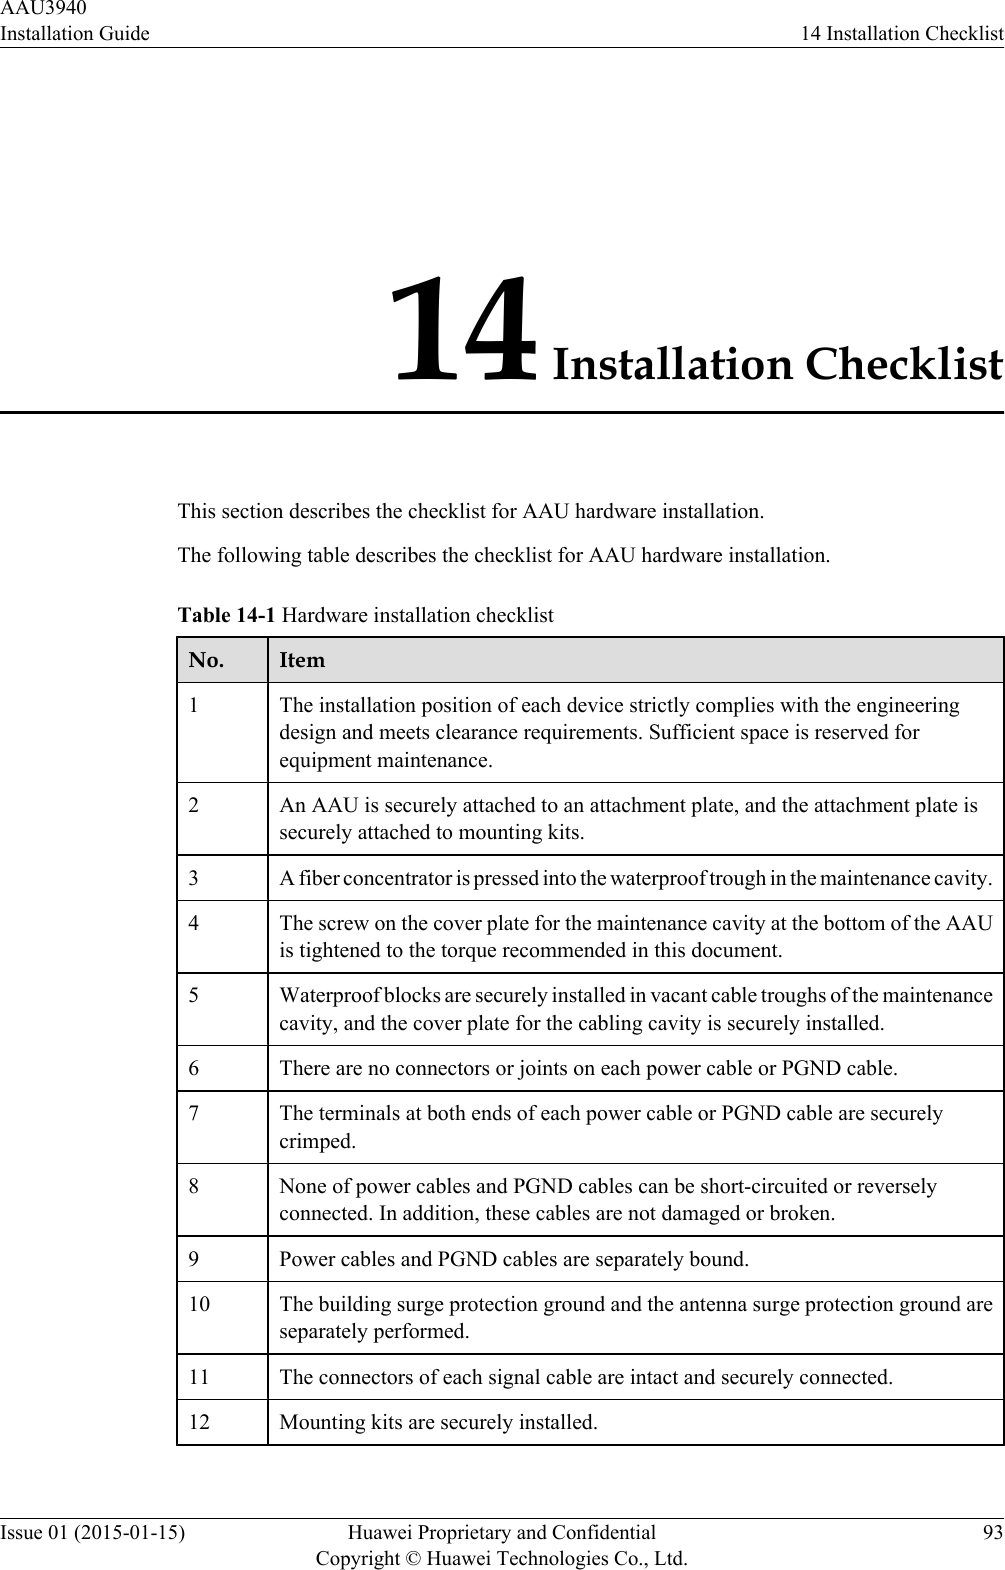 14 Installation ChecklistThis section describes the checklist for AAU hardware installation.The following table describes the checklist for AAU hardware installation.Table 14-1 Hardware installation checklistNo. Item1The installation position of each device strictly complies with the engineeringdesign and meets clearance requirements. Sufficient space is reserved forequipment maintenance.2 An AAU is securely attached to an attachment plate, and the attachment plate issecurely attached to mounting kits.3 A fiber concentrator is pressed into the waterproof trough in the maintenance cavity.4 The screw on the cover plate for the maintenance cavity at the bottom of the AAUis tightened to the torque recommended in this document.5 Waterproof blocks are securely installed in vacant cable troughs of the maintenancecavity, and the cover plate for the cabling cavity is securely installed.6 There are no connectors or joints on each power cable or PGND cable.7 The terminals at both ends of each power cable or PGND cable are securelycrimped.8 None of power cables and PGND cables can be short-circuited or reverselyconnected. In addition, these cables are not damaged or broken.9 Power cables and PGND cables are separately bound.10 The building surge protection ground and the antenna surge protection ground areseparately performed.11 The connectors of each signal cable are intact and securely connected.12 Mounting kits are securely installed.AAU3940Installation Guide 14 Installation ChecklistIssue 01 (2015-01-15) Huawei Proprietary and ConfidentialCopyright © Huawei Technologies Co., Ltd.93